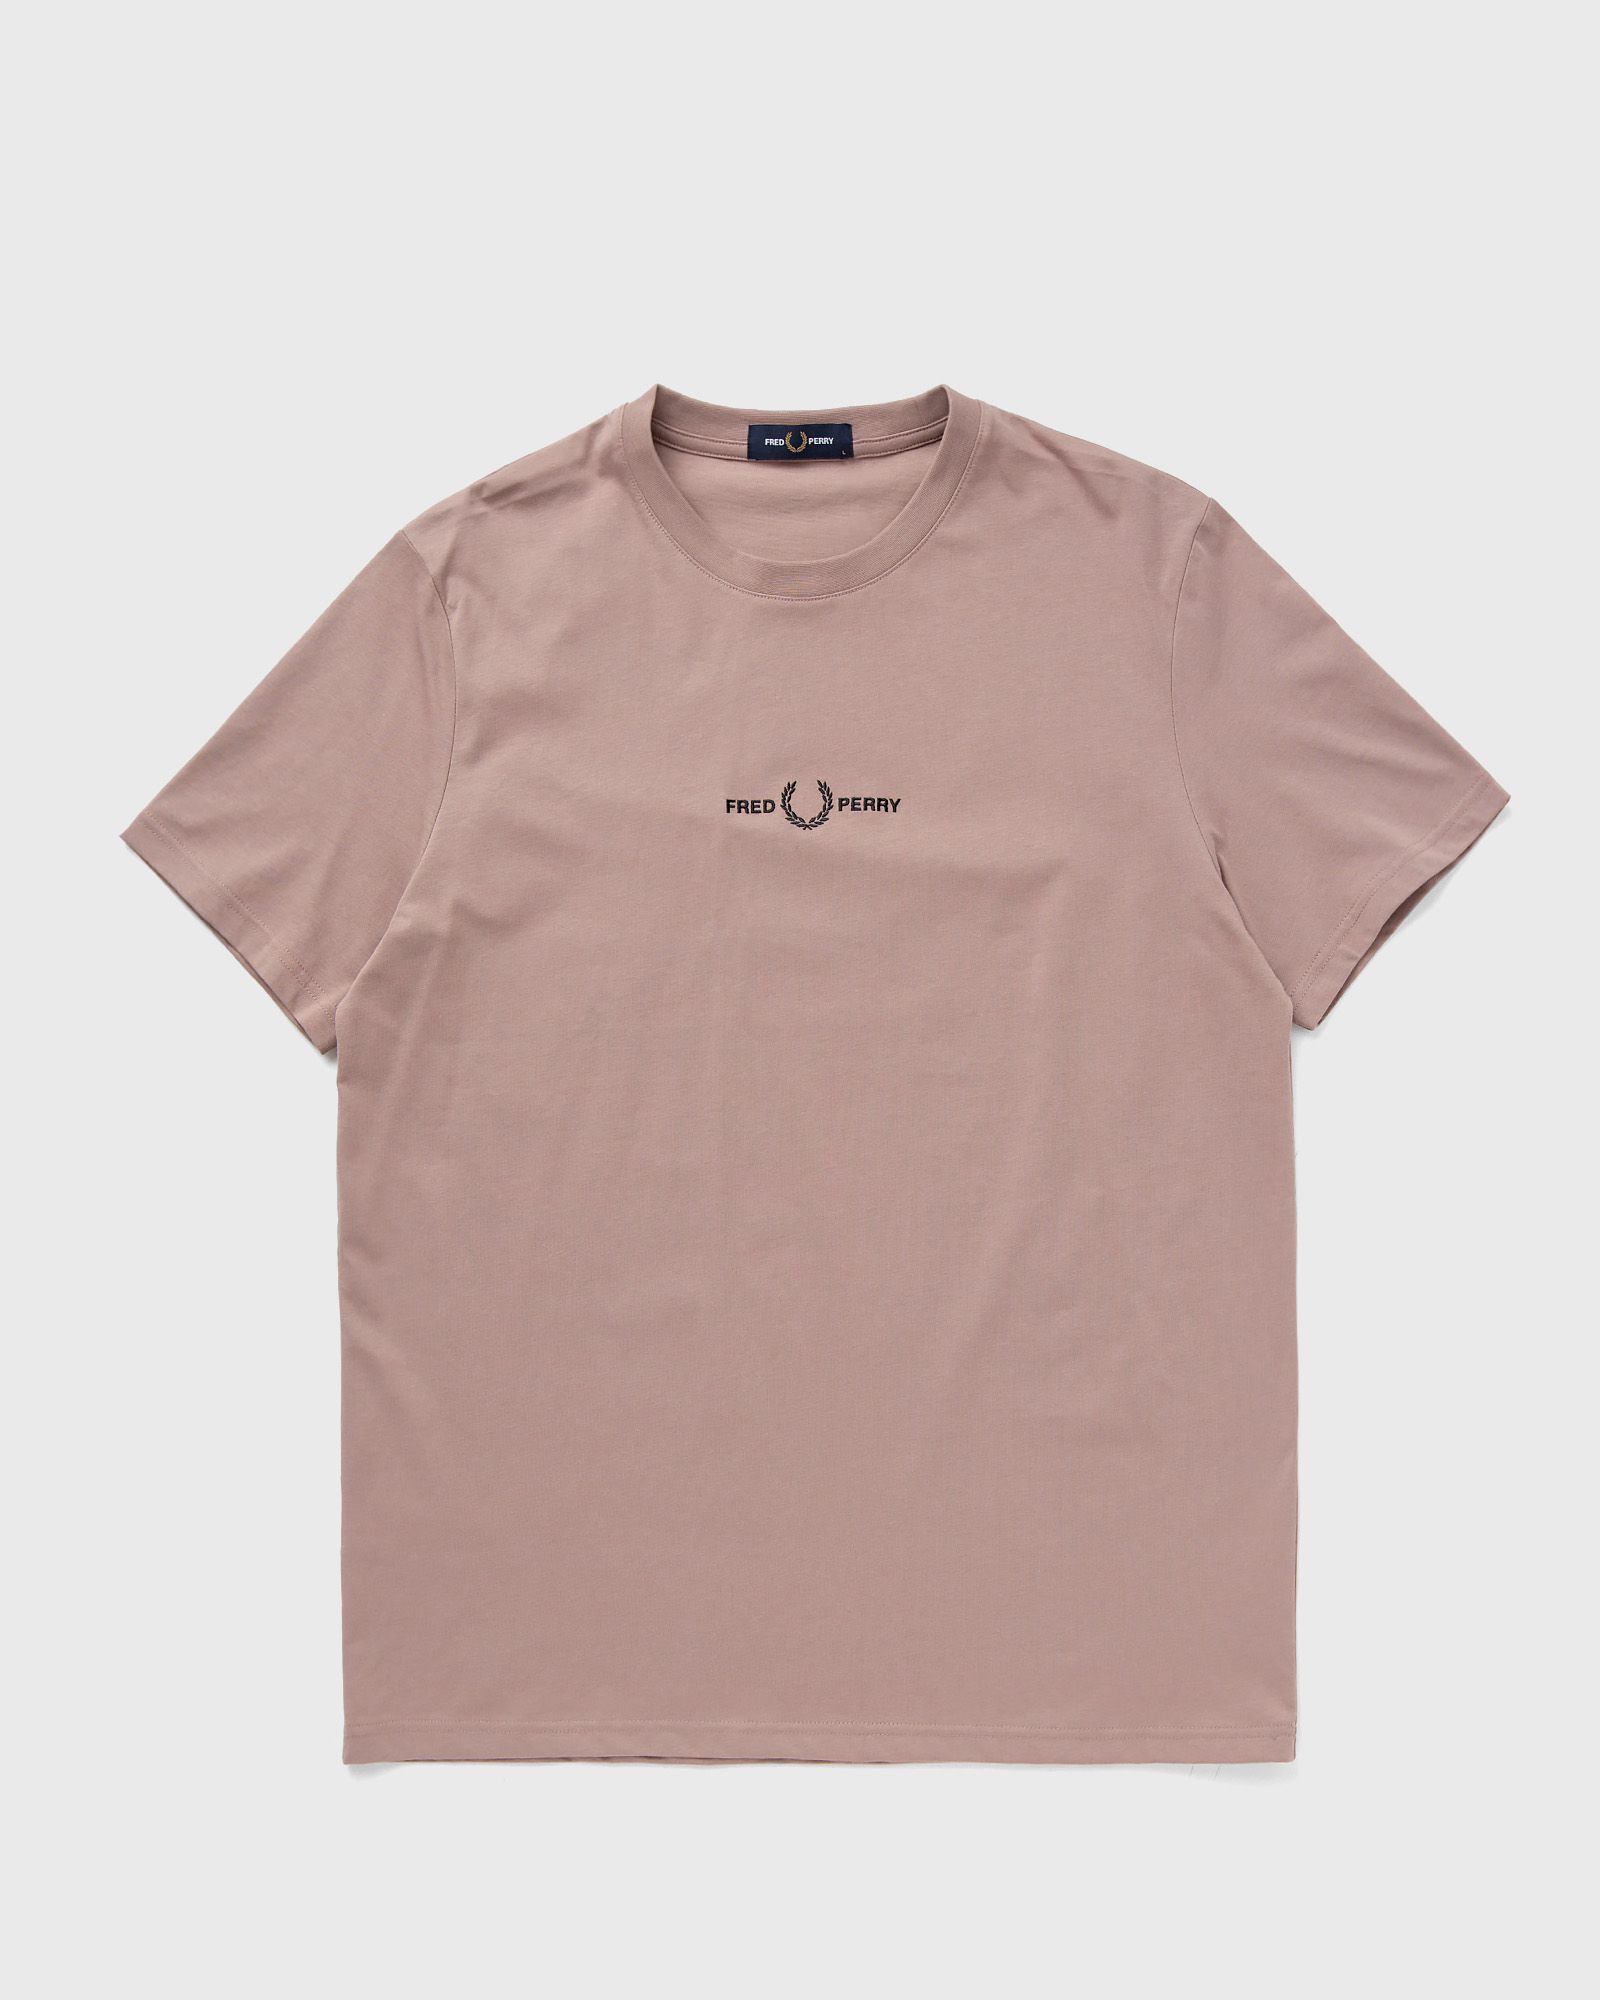 Fred Perry Embroidered T-Shirt men Shortsleeves pink in Größe:S von Fred Perry